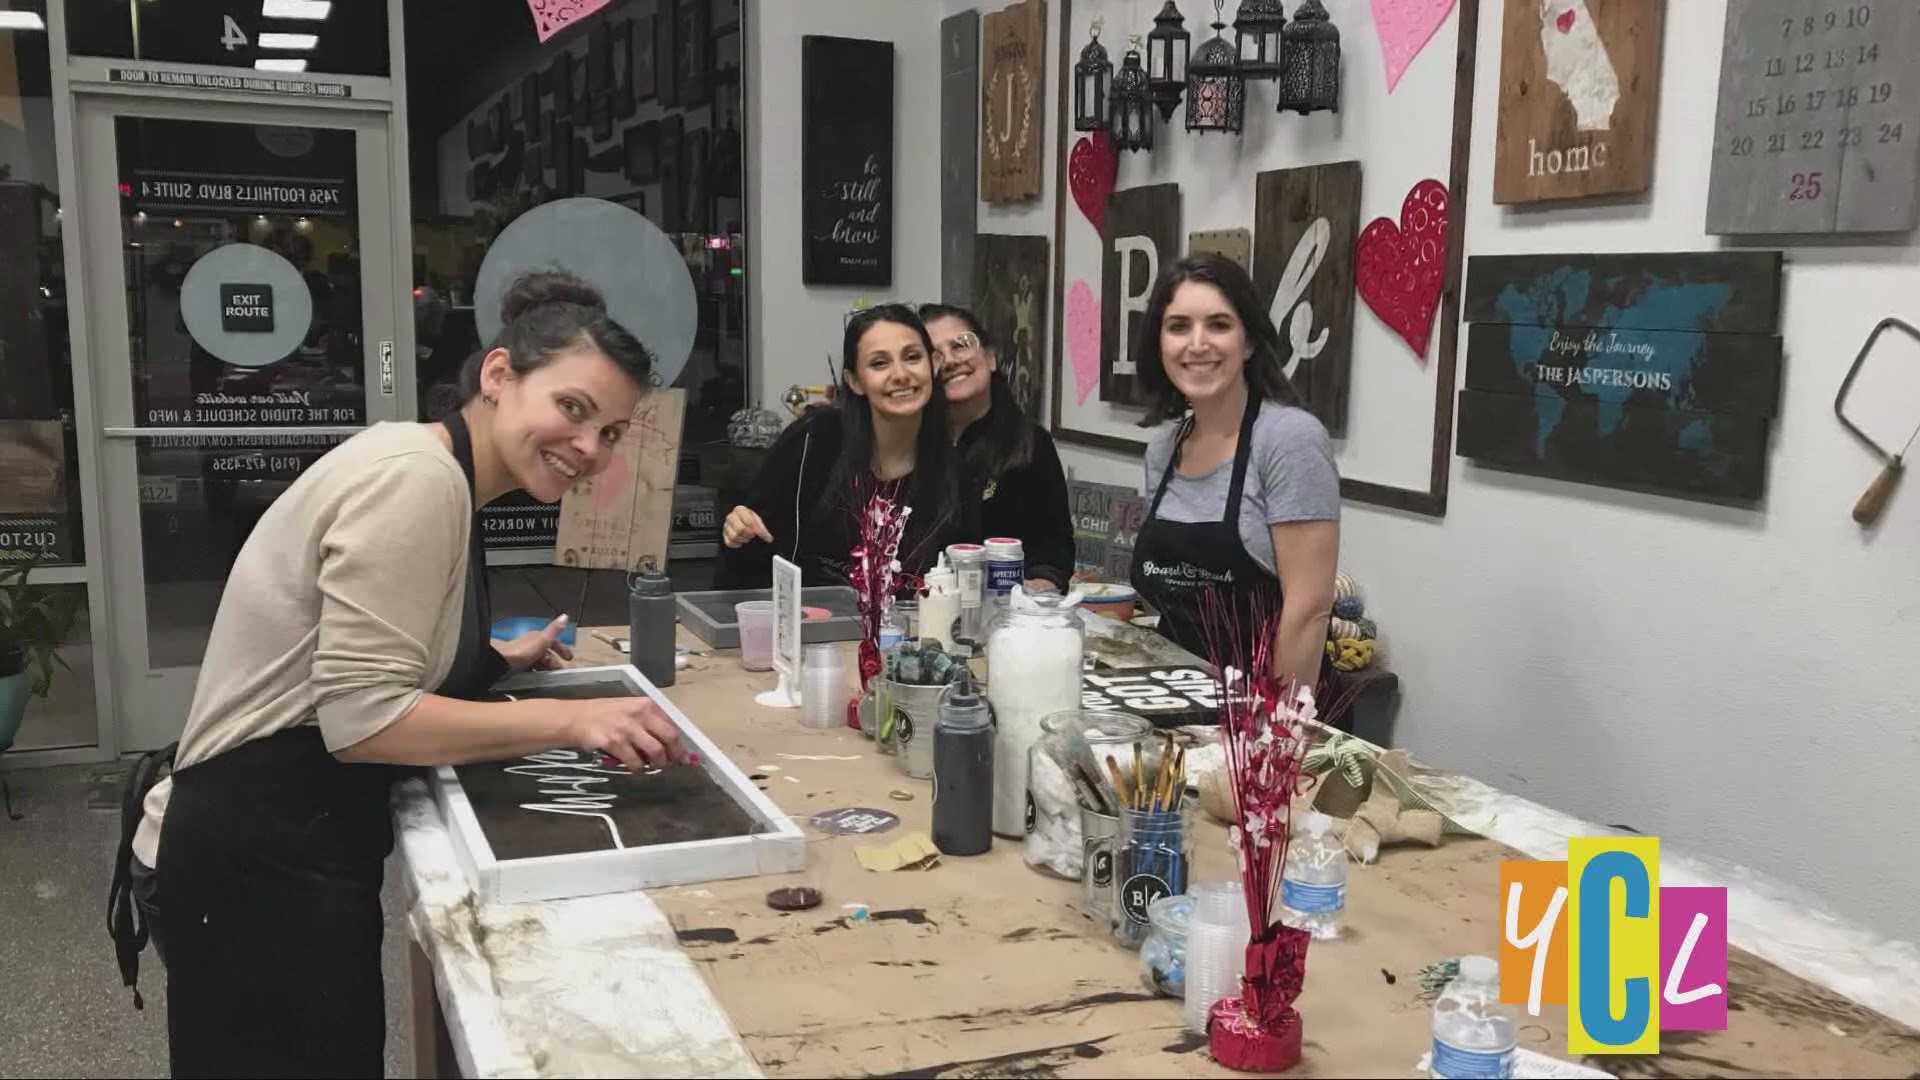 Are you looking for a night out with friends? Is your inner DIY itching for a fun new project without having to buy all your own supplies and make a mess at your house? Then book a workshop at Board & Brush Creative Studio in Roseville.